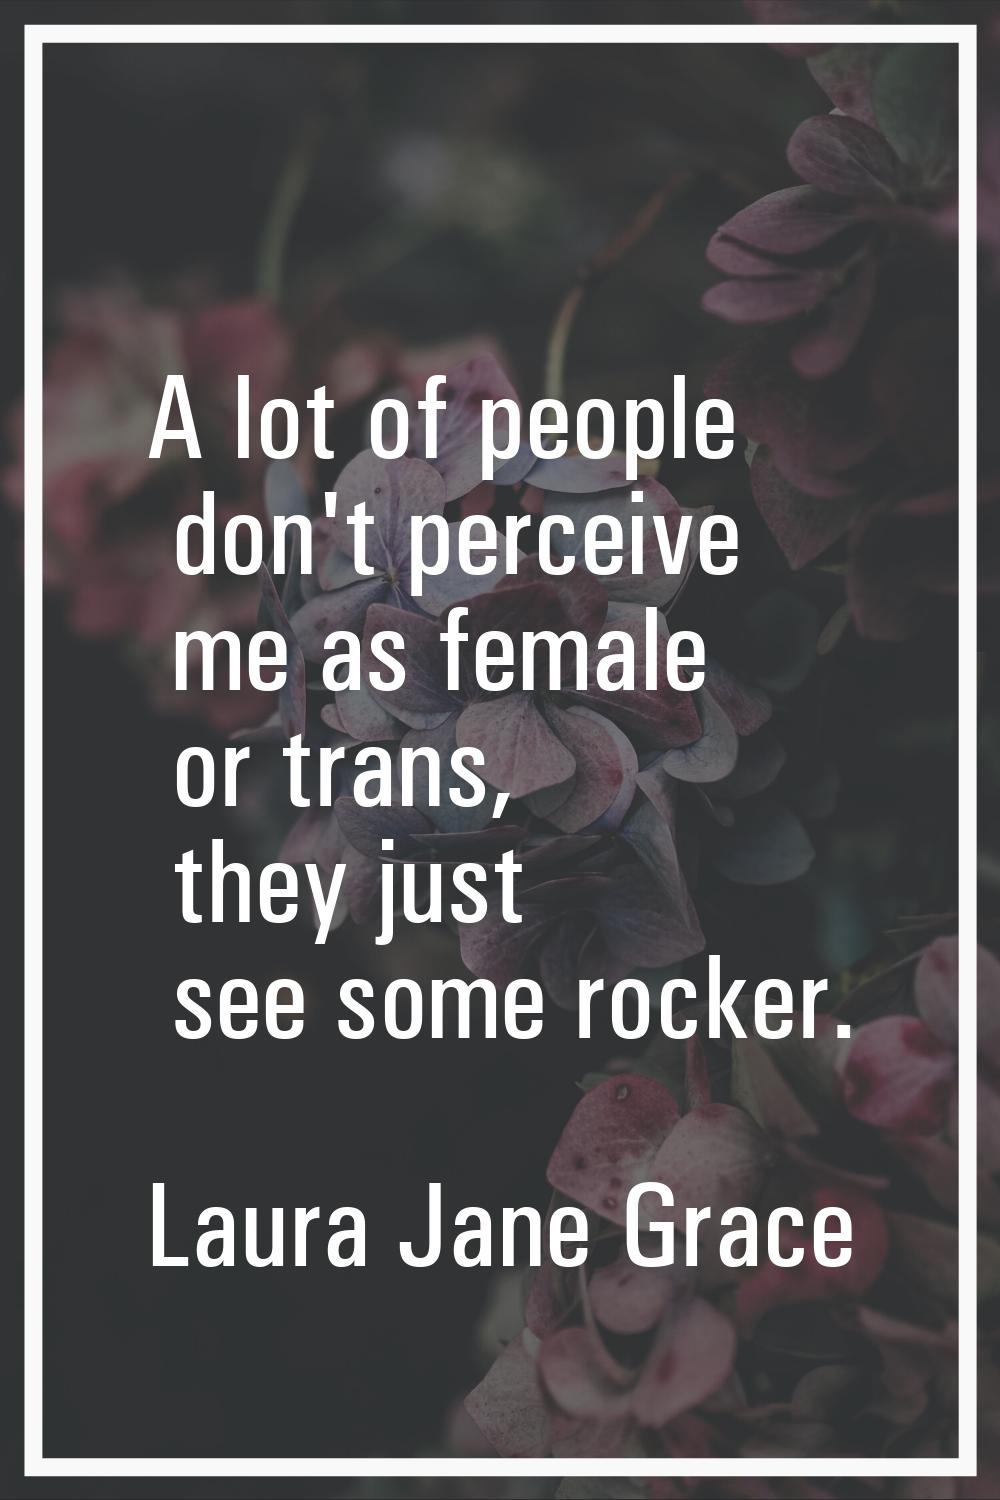 A lot of people don't perceive me as female or trans, they just see some rocker.